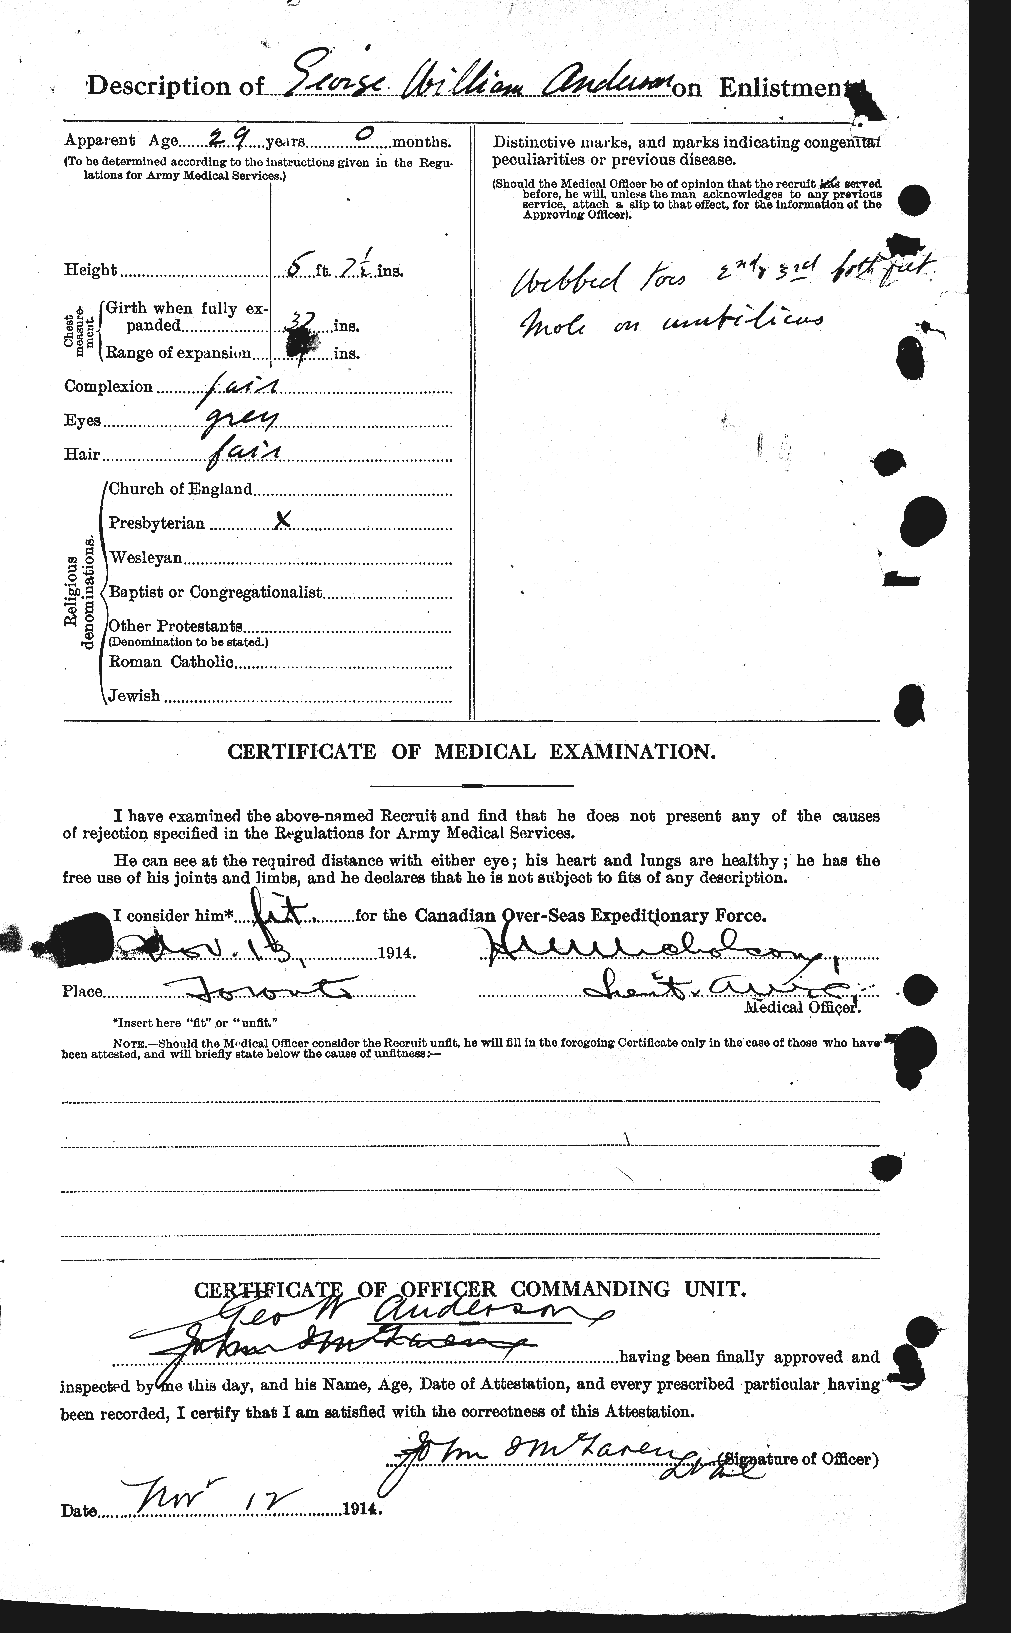 Personnel Records of the First World War - CEF 209685b